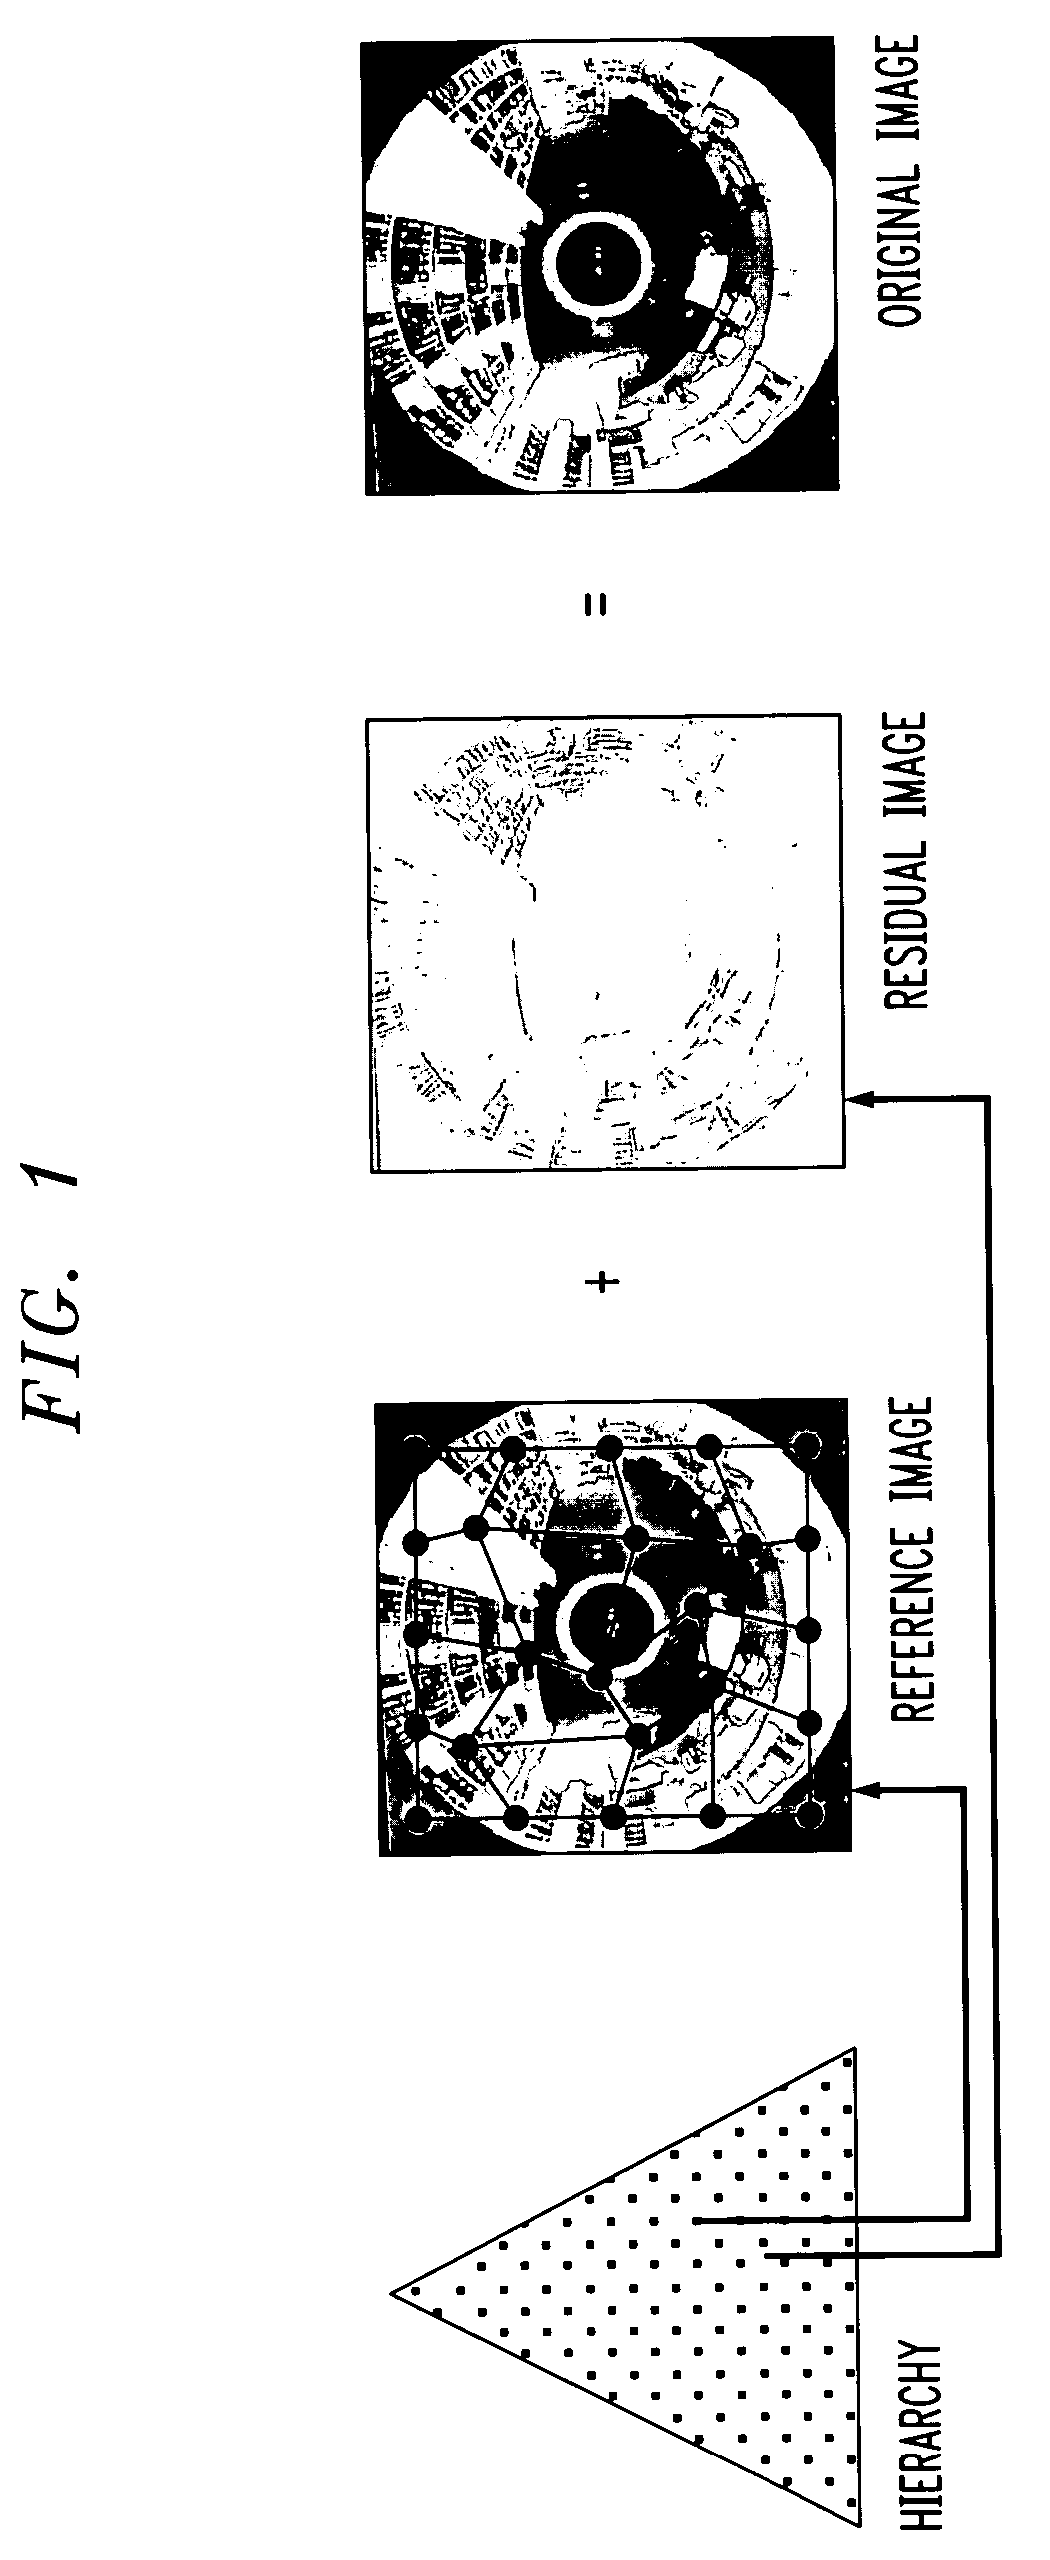 Method and apparatus for compressing and decompressing images captured from viewpoints throughout N-dimensional space